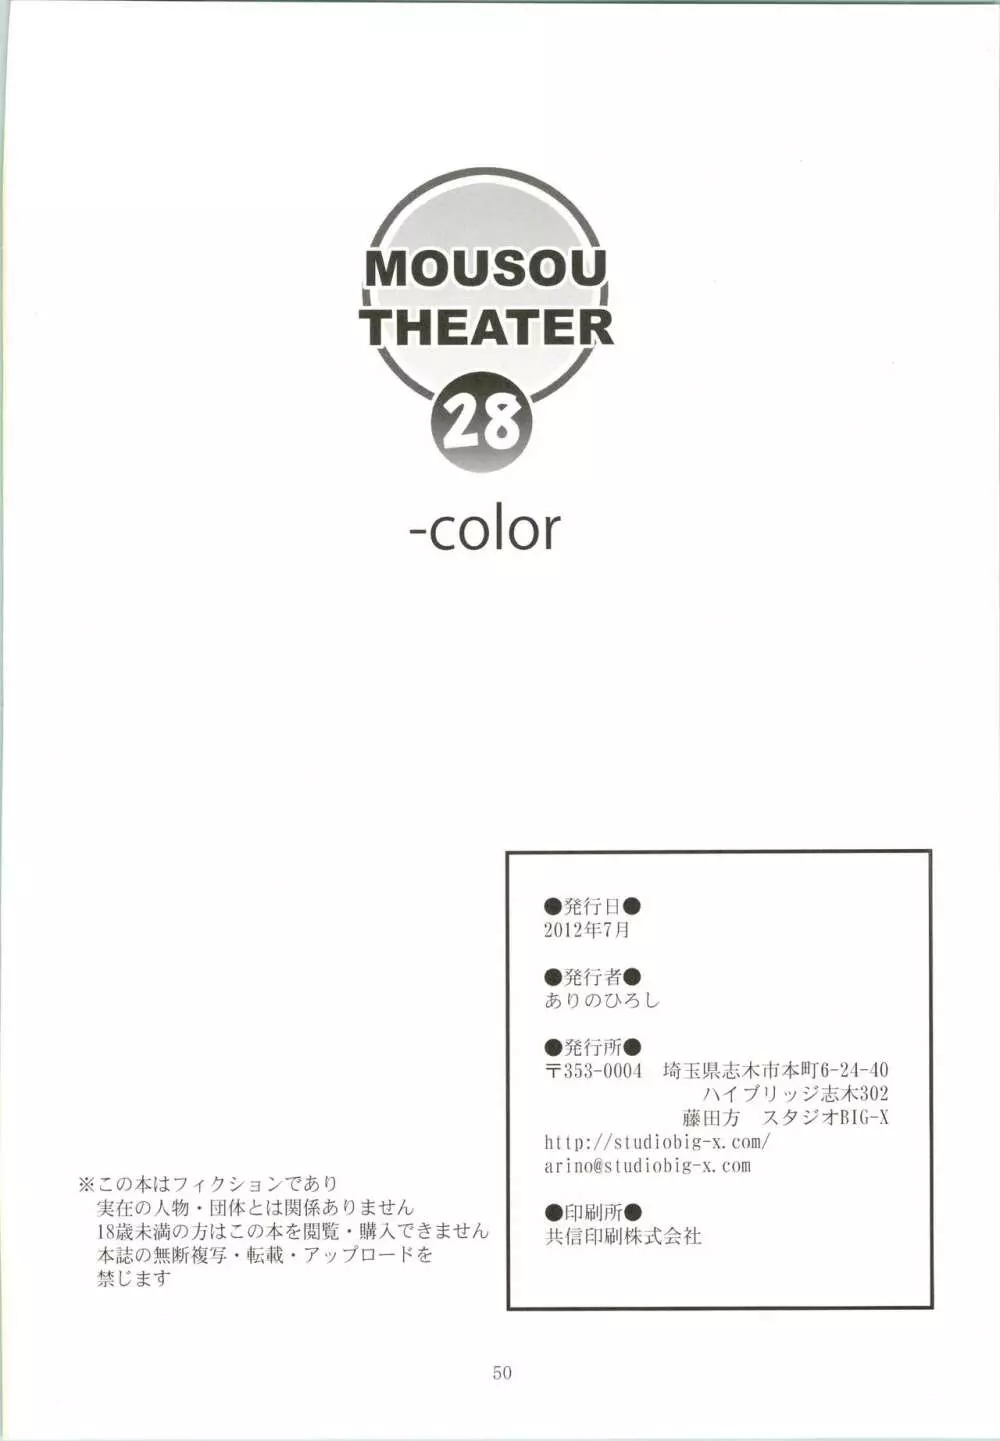 MOUSOU THEATER 28 -color 52ページ